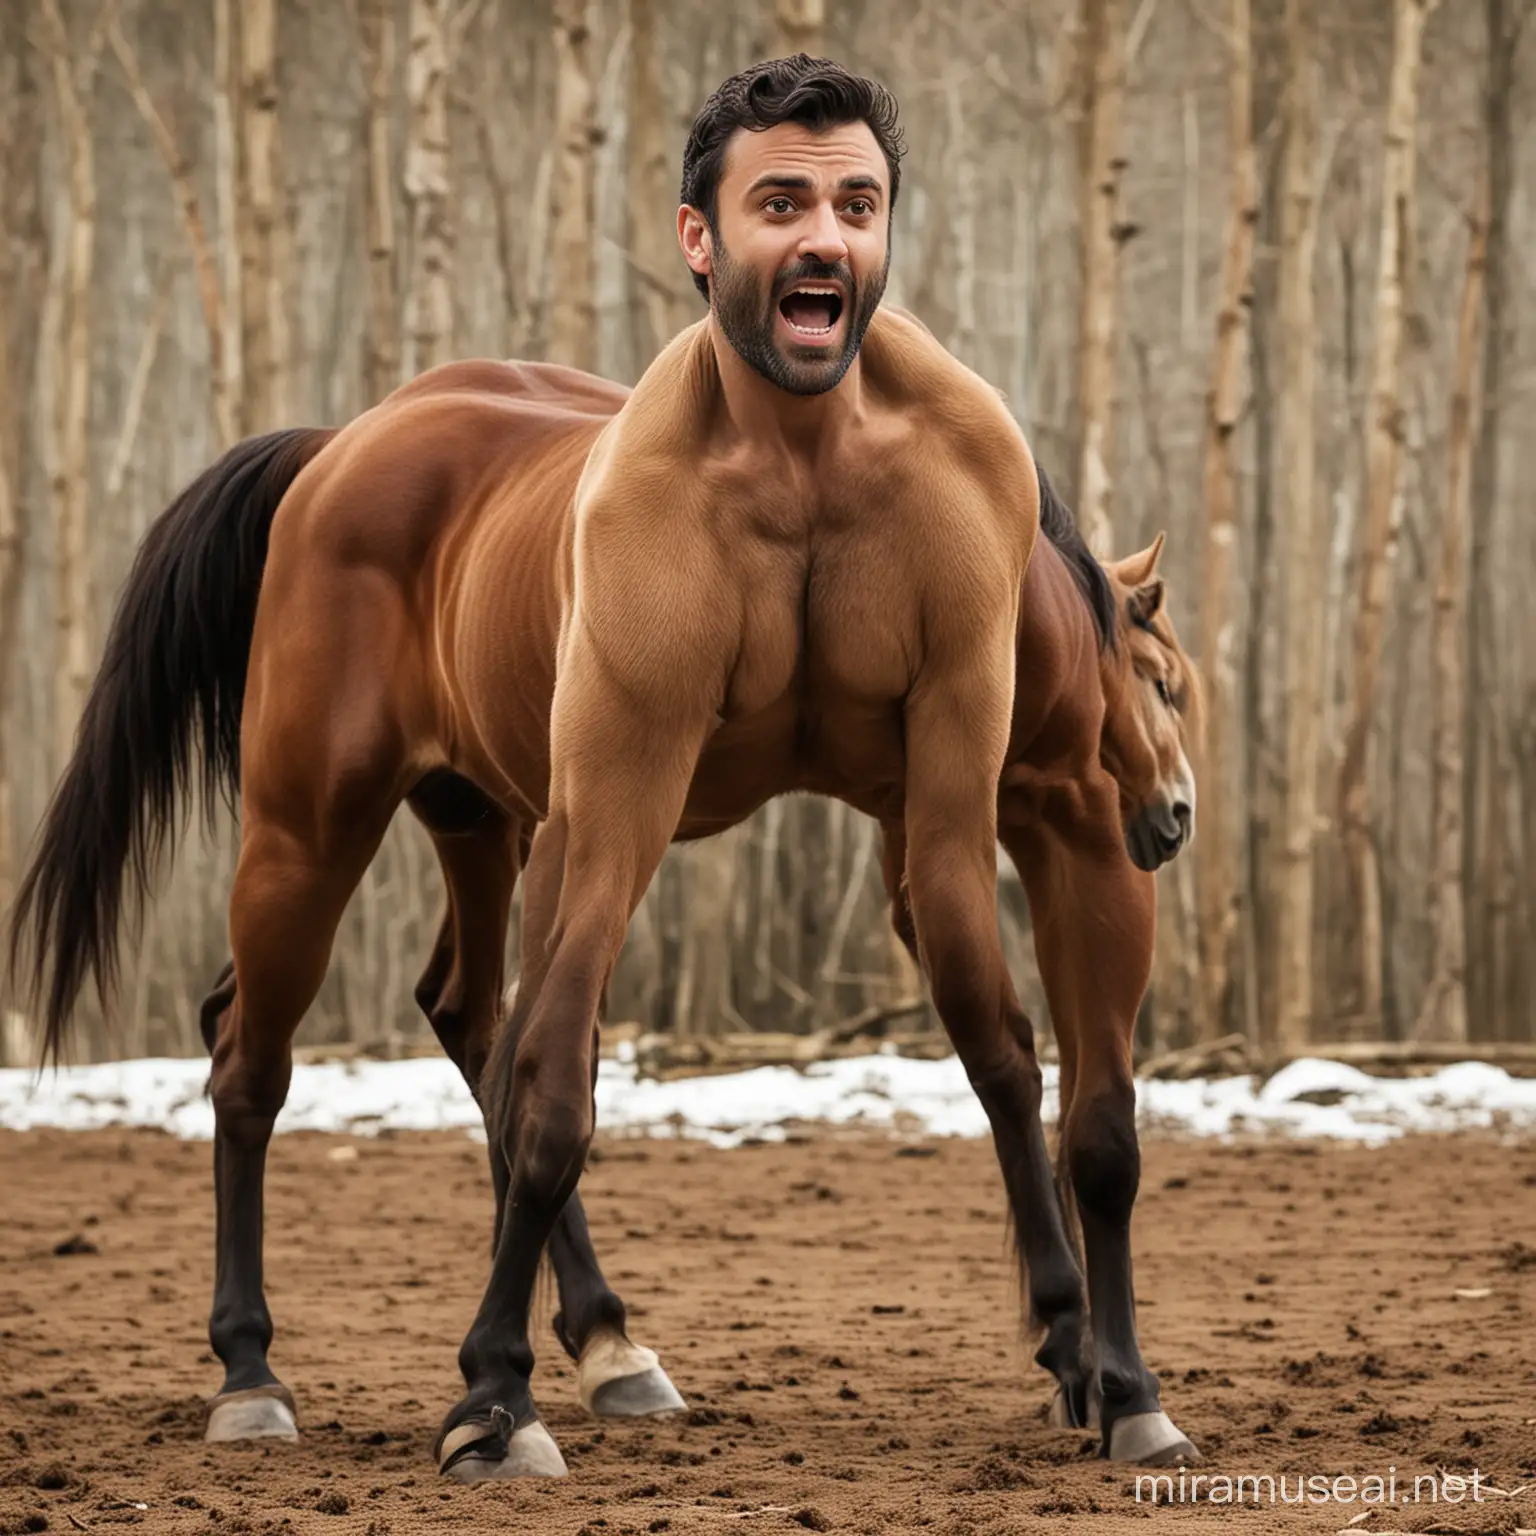 Oscar Issac on all fours transforming into a horse. He has horse ears. He has horse legs. He has horse hooves. He has a horse tail. He has a complete horse body and neighing like a horse. But his head is human.